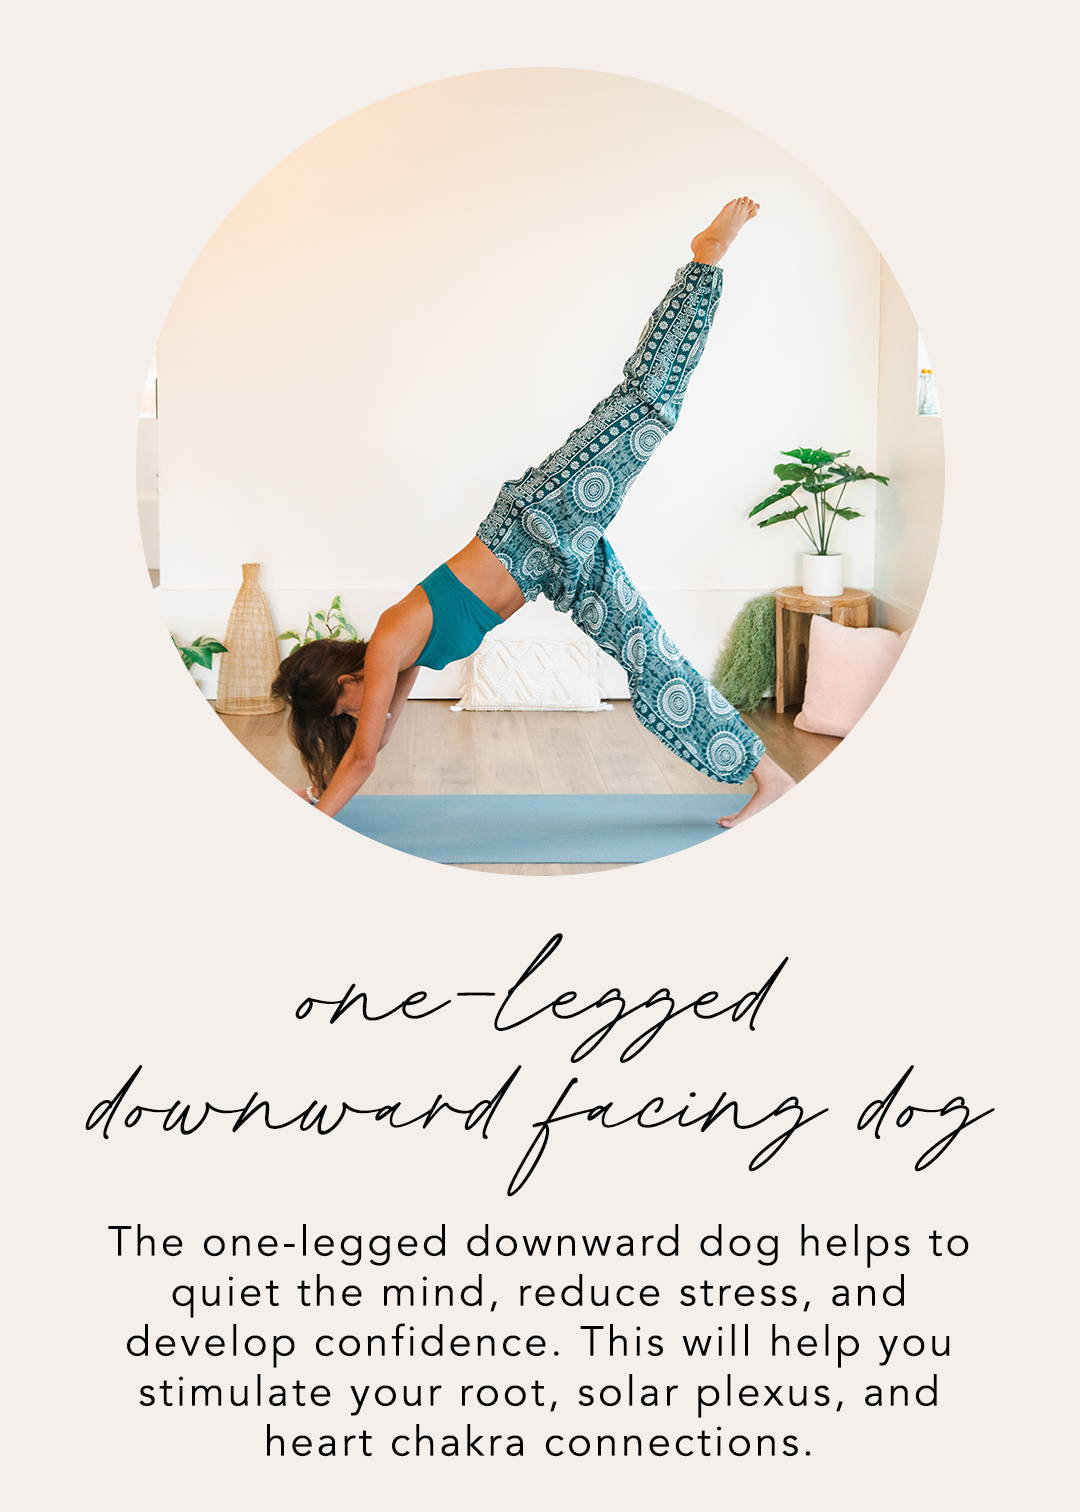 One-Legged Downward Facing Dog: The one-legged downward dog helps to quiet the mind, reduce stress, and develop confidence. This will help you stimulate your root, solar plexus, and heart chakra connections.